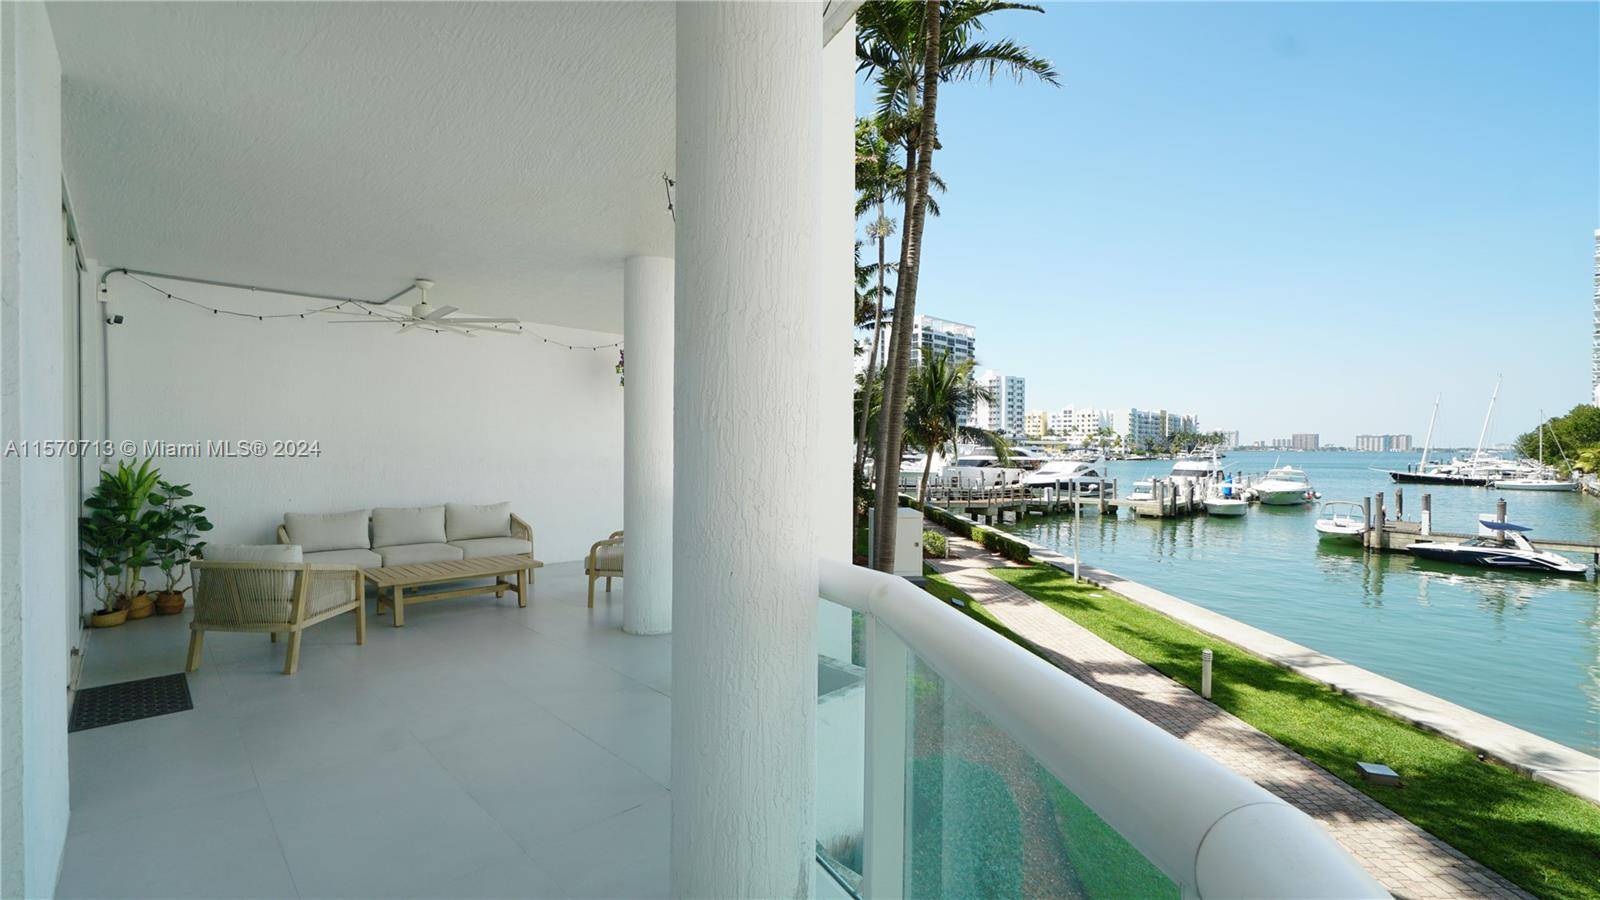 Fully furnished and tastefully decorated 3 bedroom 2 baths right on the water with access to Marina for pick up drop off at desirable 360 Condo.